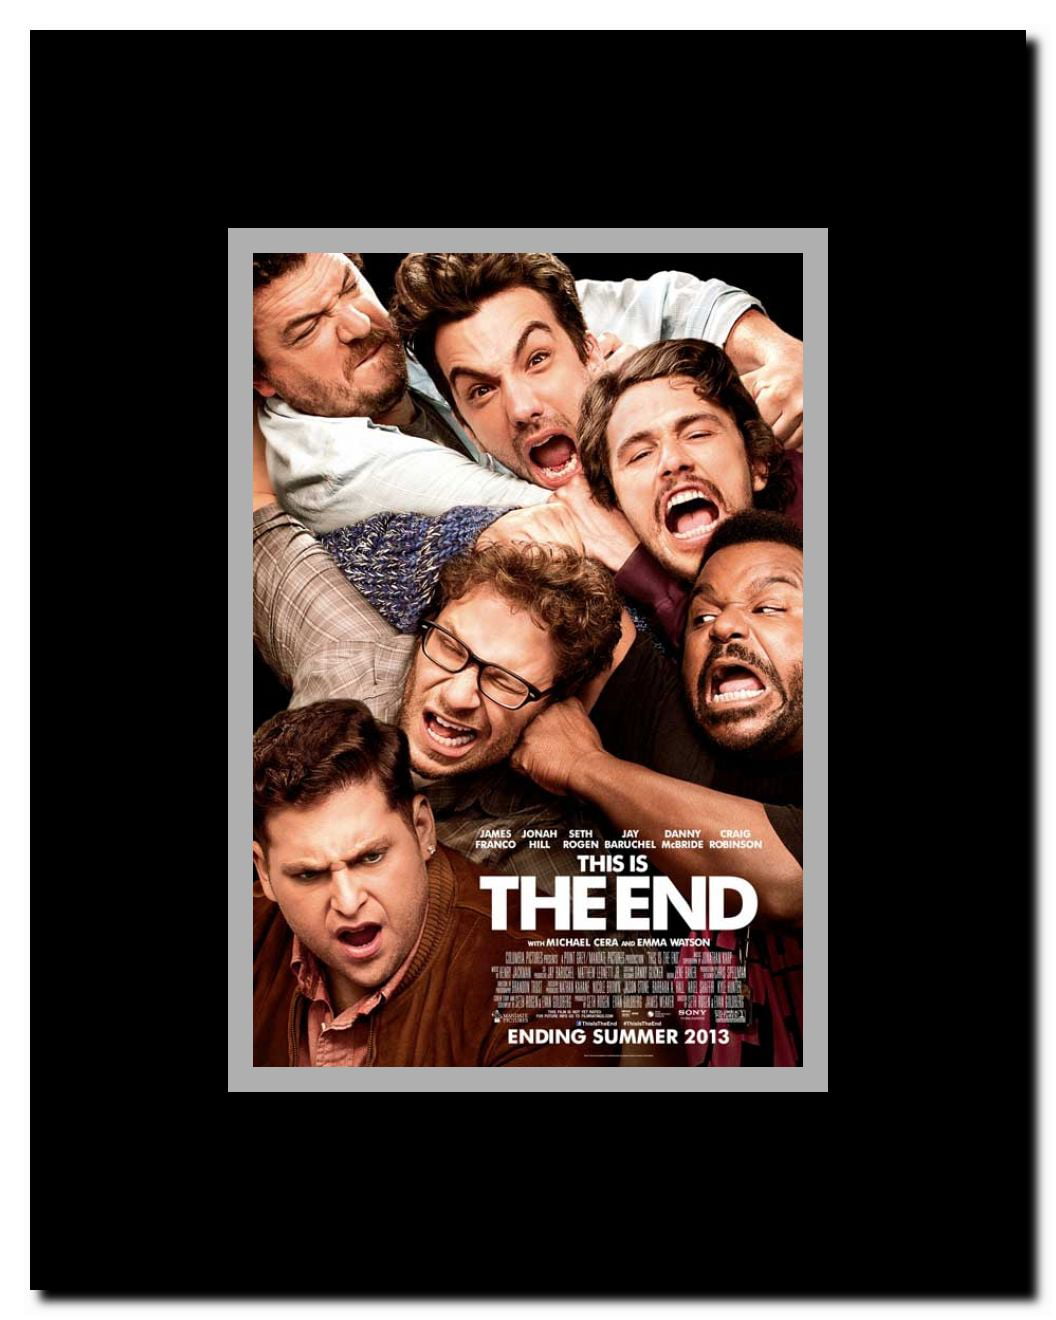 2013 Hill This Is The End Seth Rogen - James Franco Movie Poster 24x36